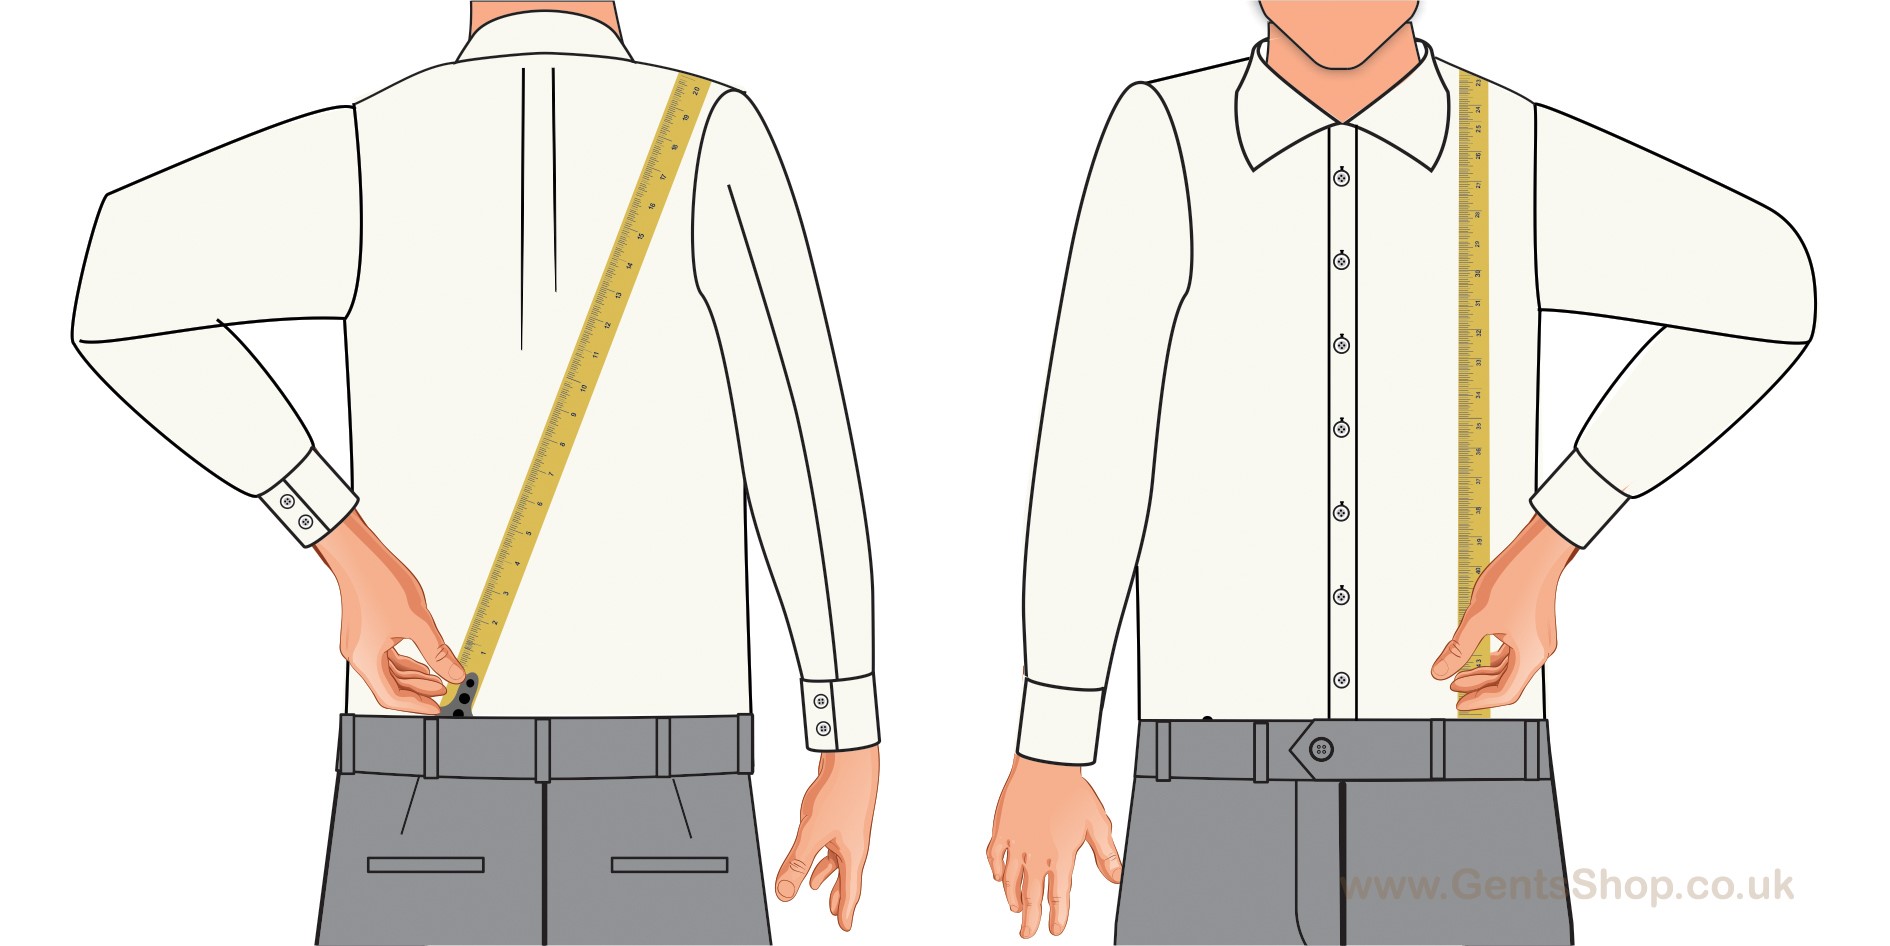 How to measure to ensure the correct size of trouser braces or suspenders for trousers. 